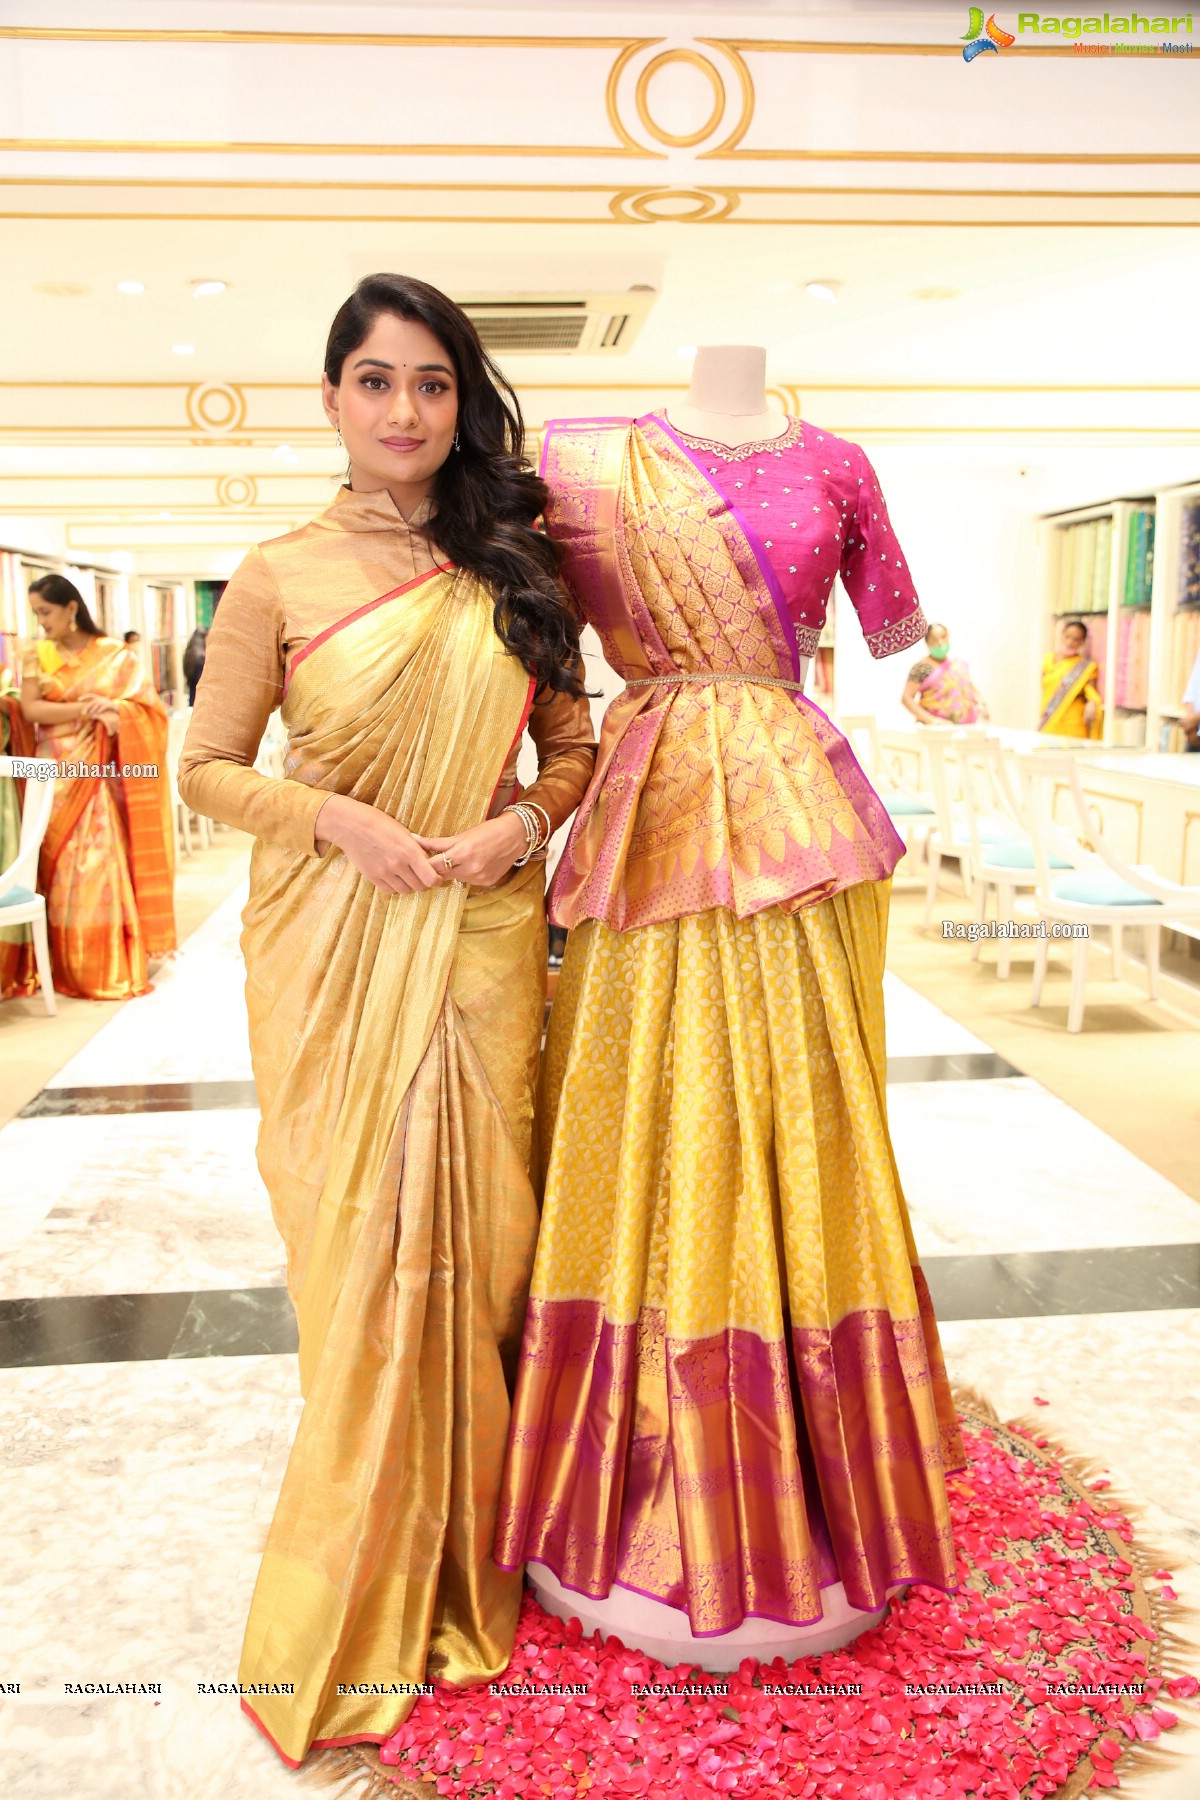 Singhania’s Launches New Bridal Collection ‘Satvikam’